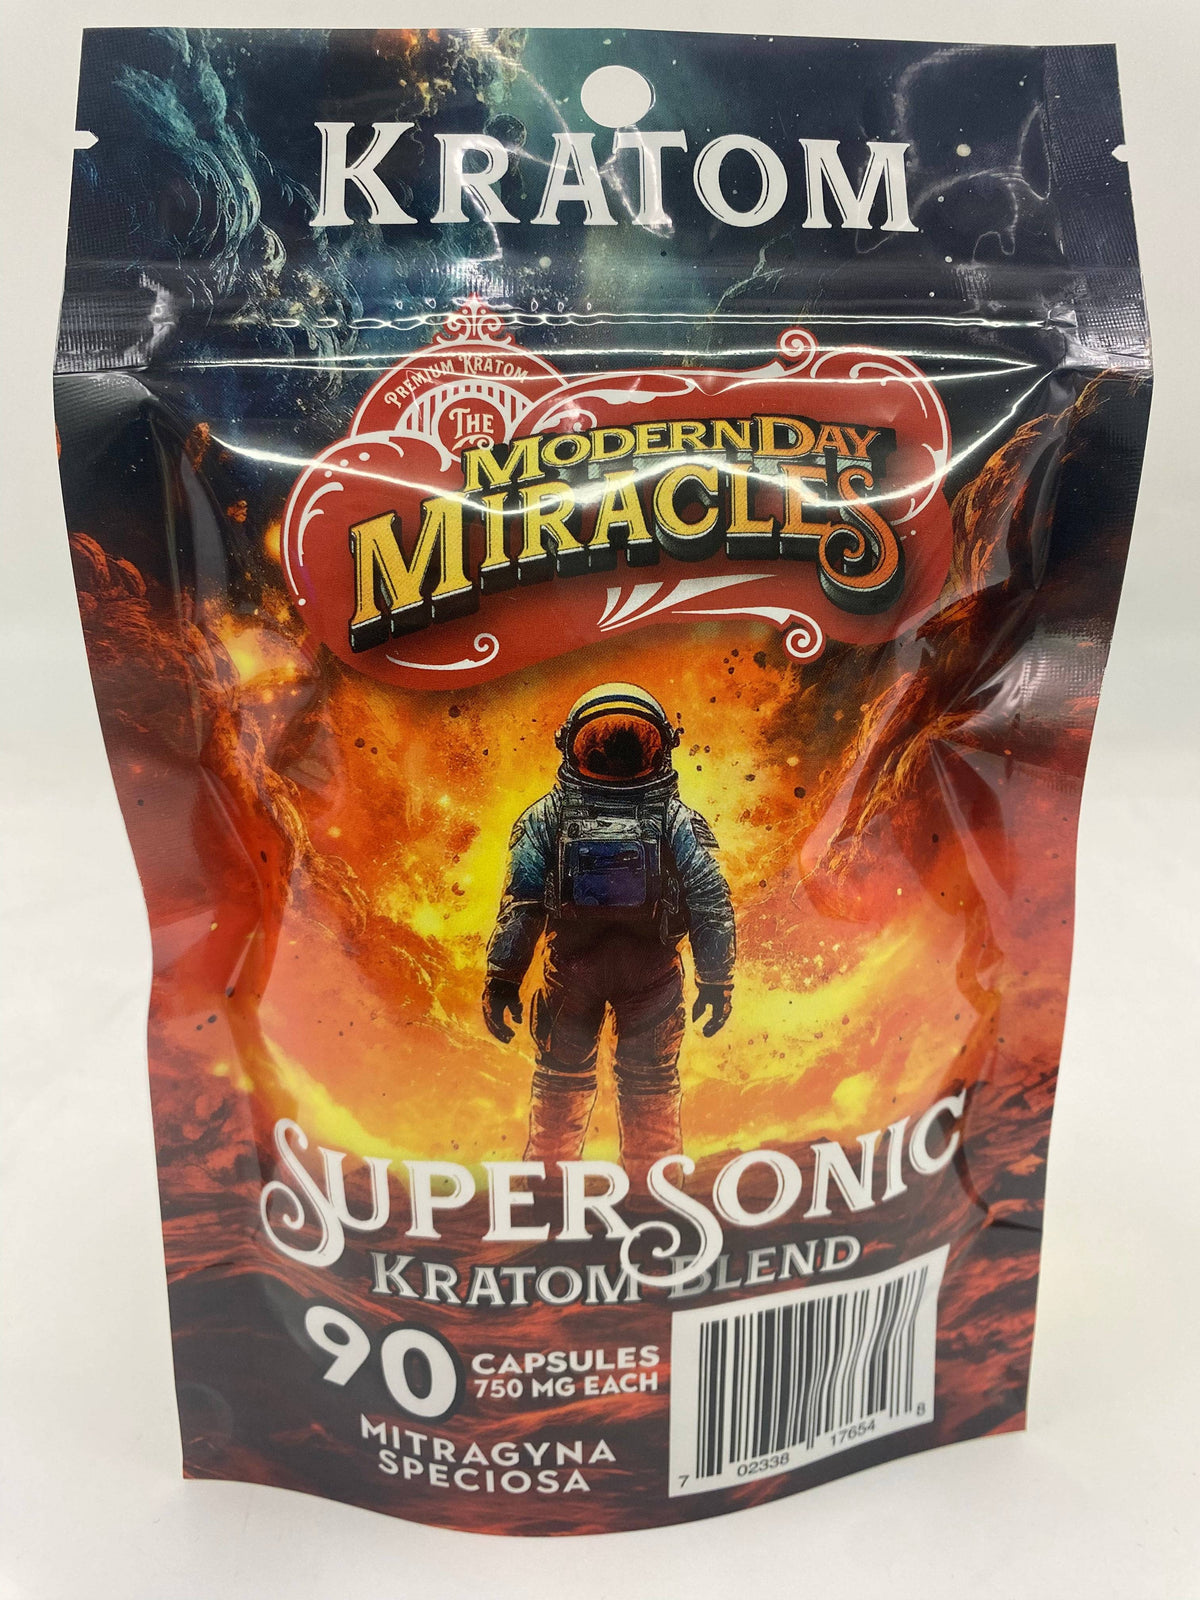 Modern Day Miracles Space Blends- Supersonic Red Kratom Borneo Blend 90ct Capsules